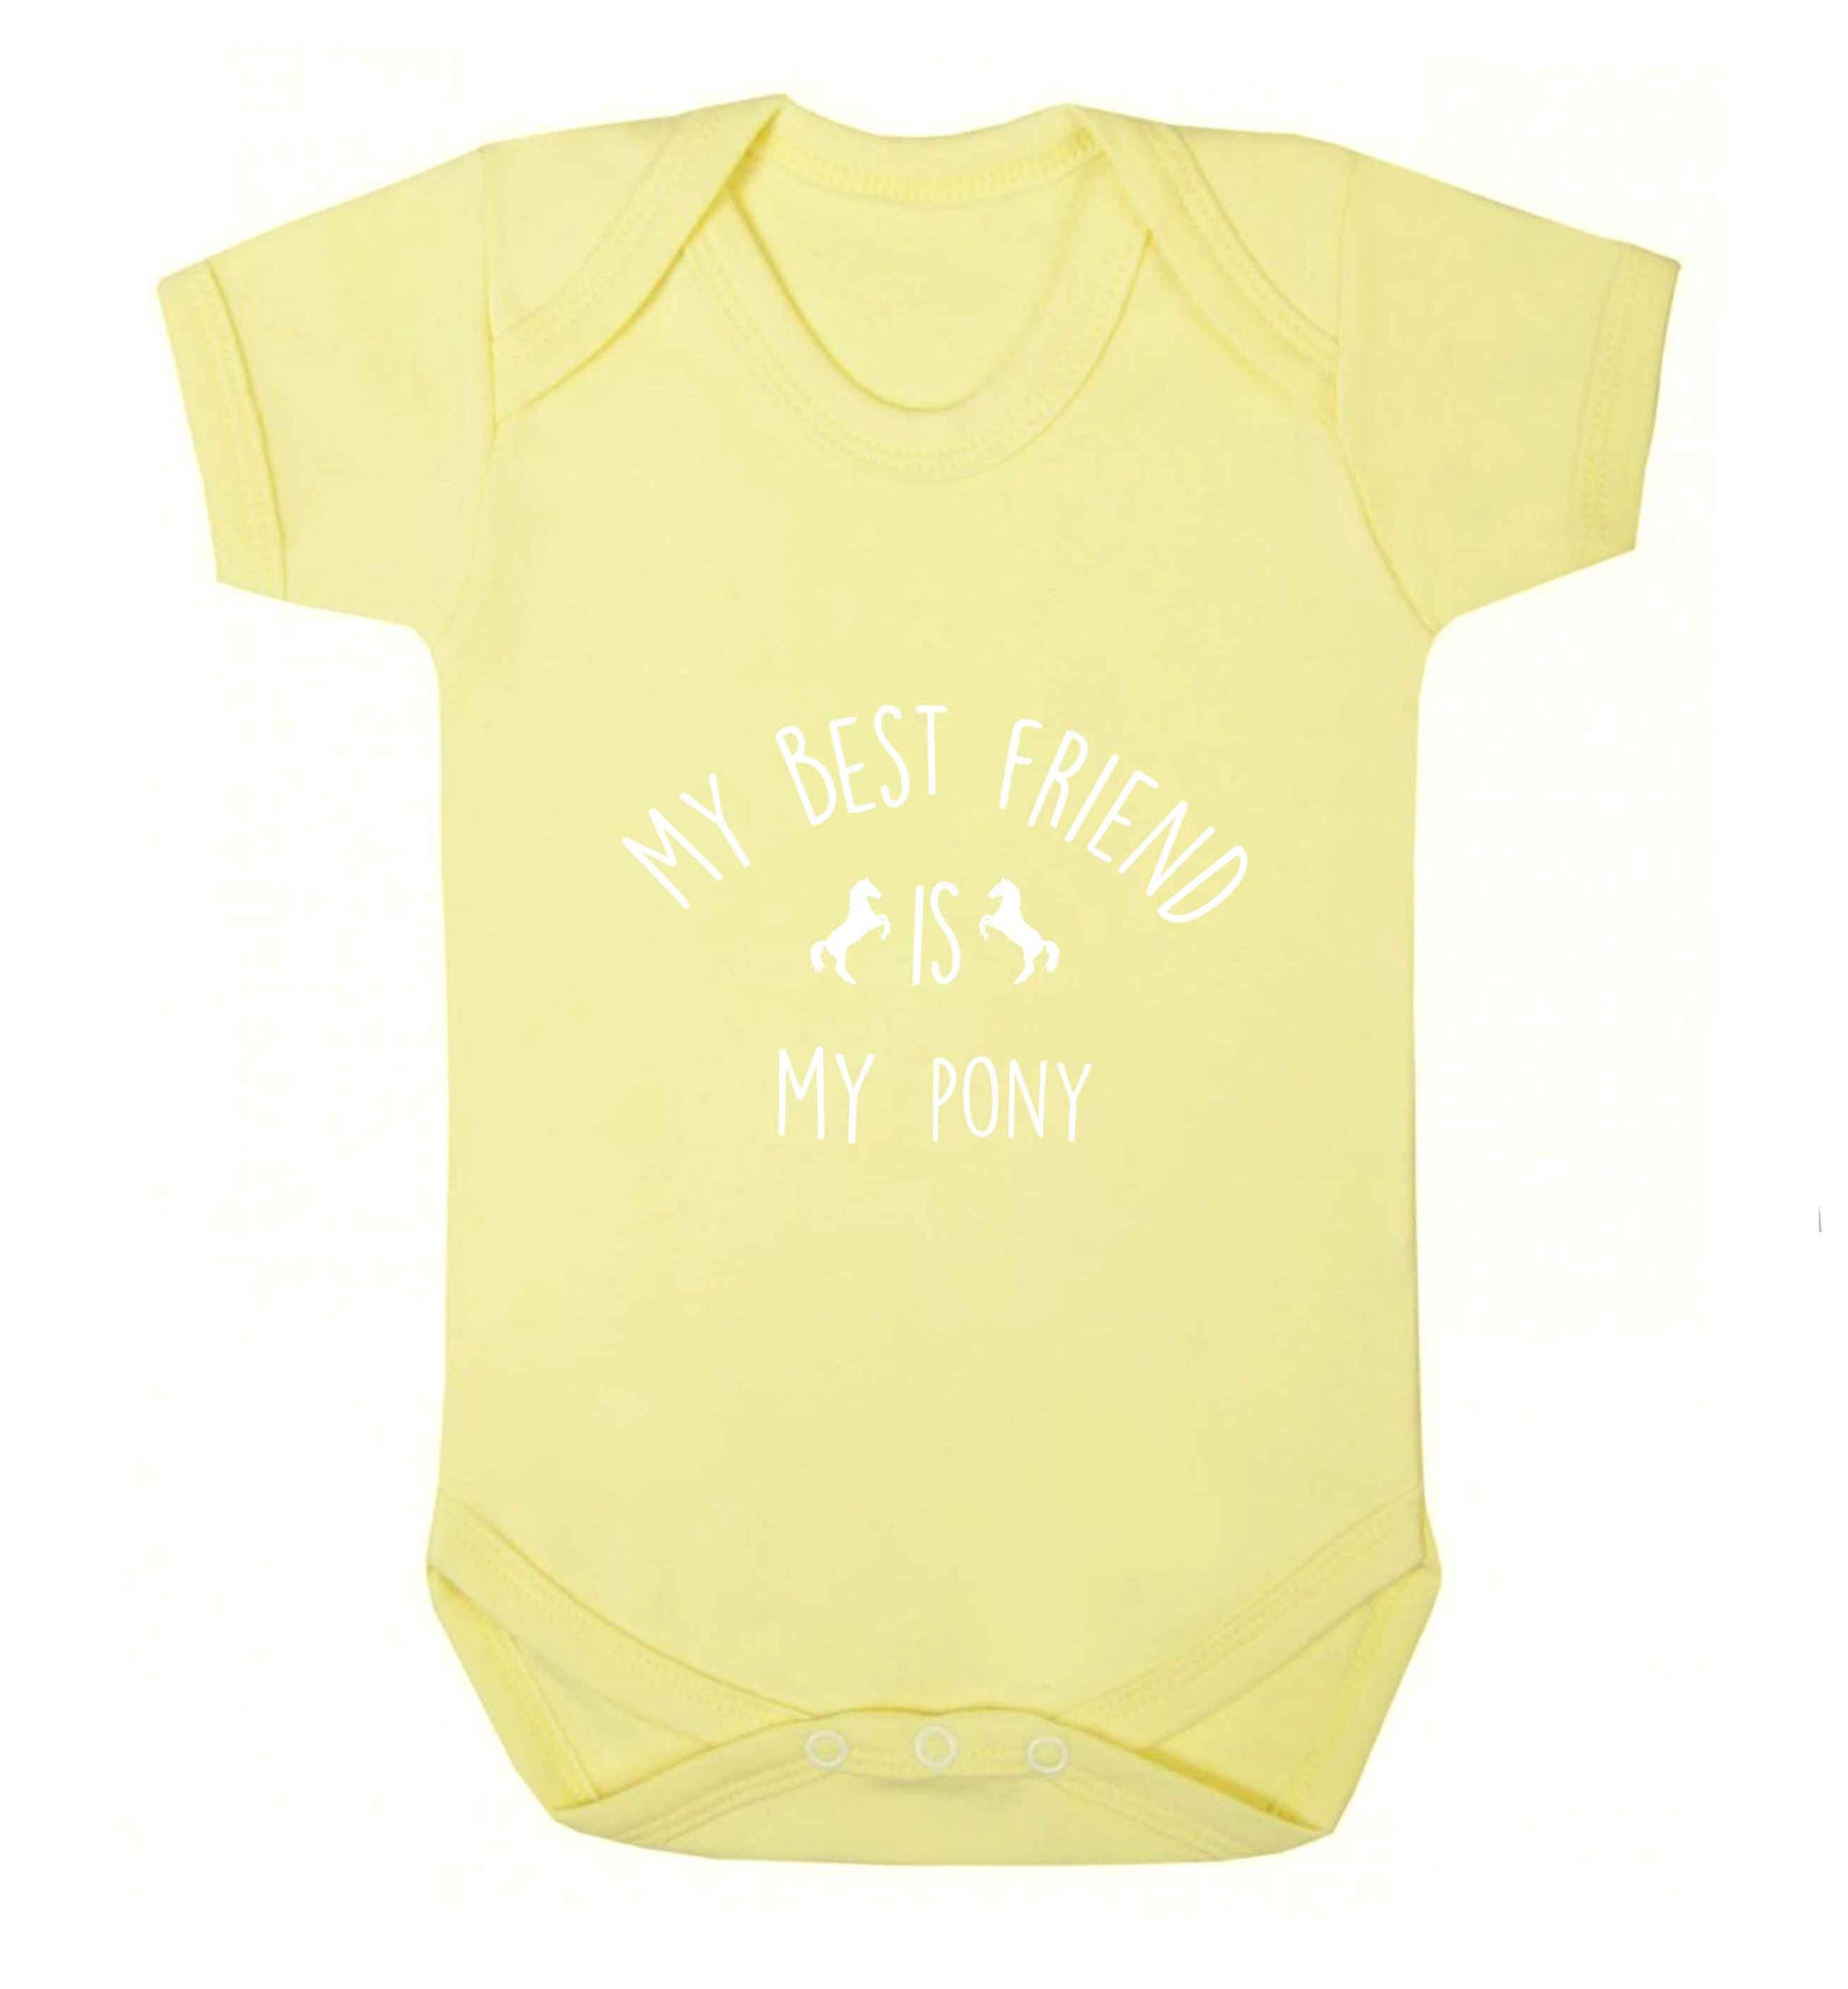 My best friend is my pony baby vest pale yellow 18-24 months